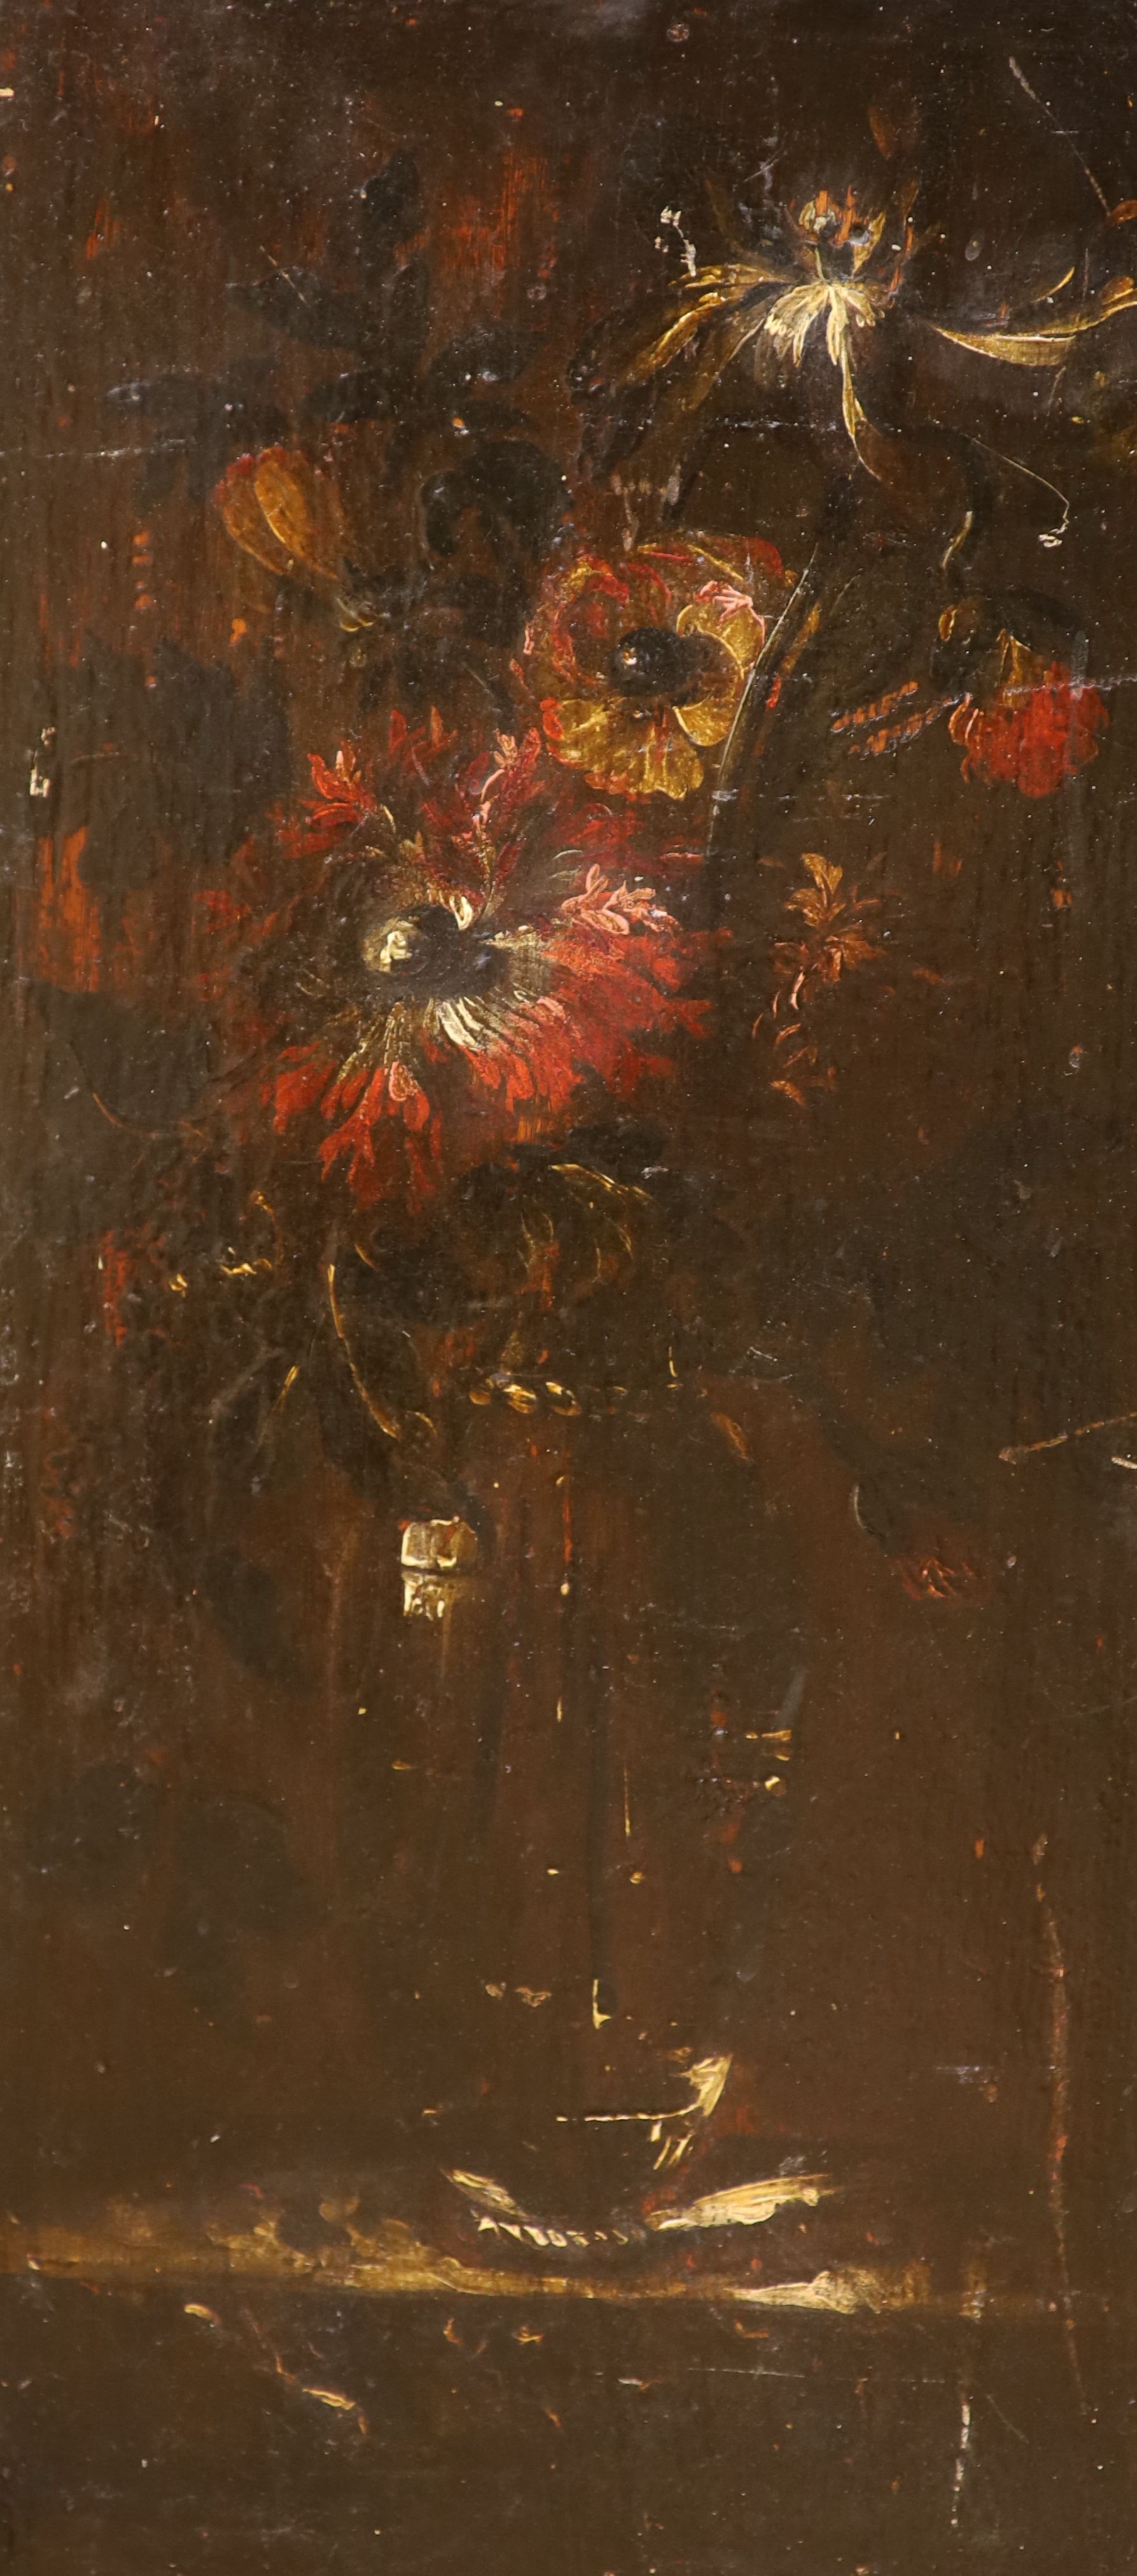 19th century Continental School, oil on wooden panel, Still life of flowers in a vase, 57 x 26cm, unframed